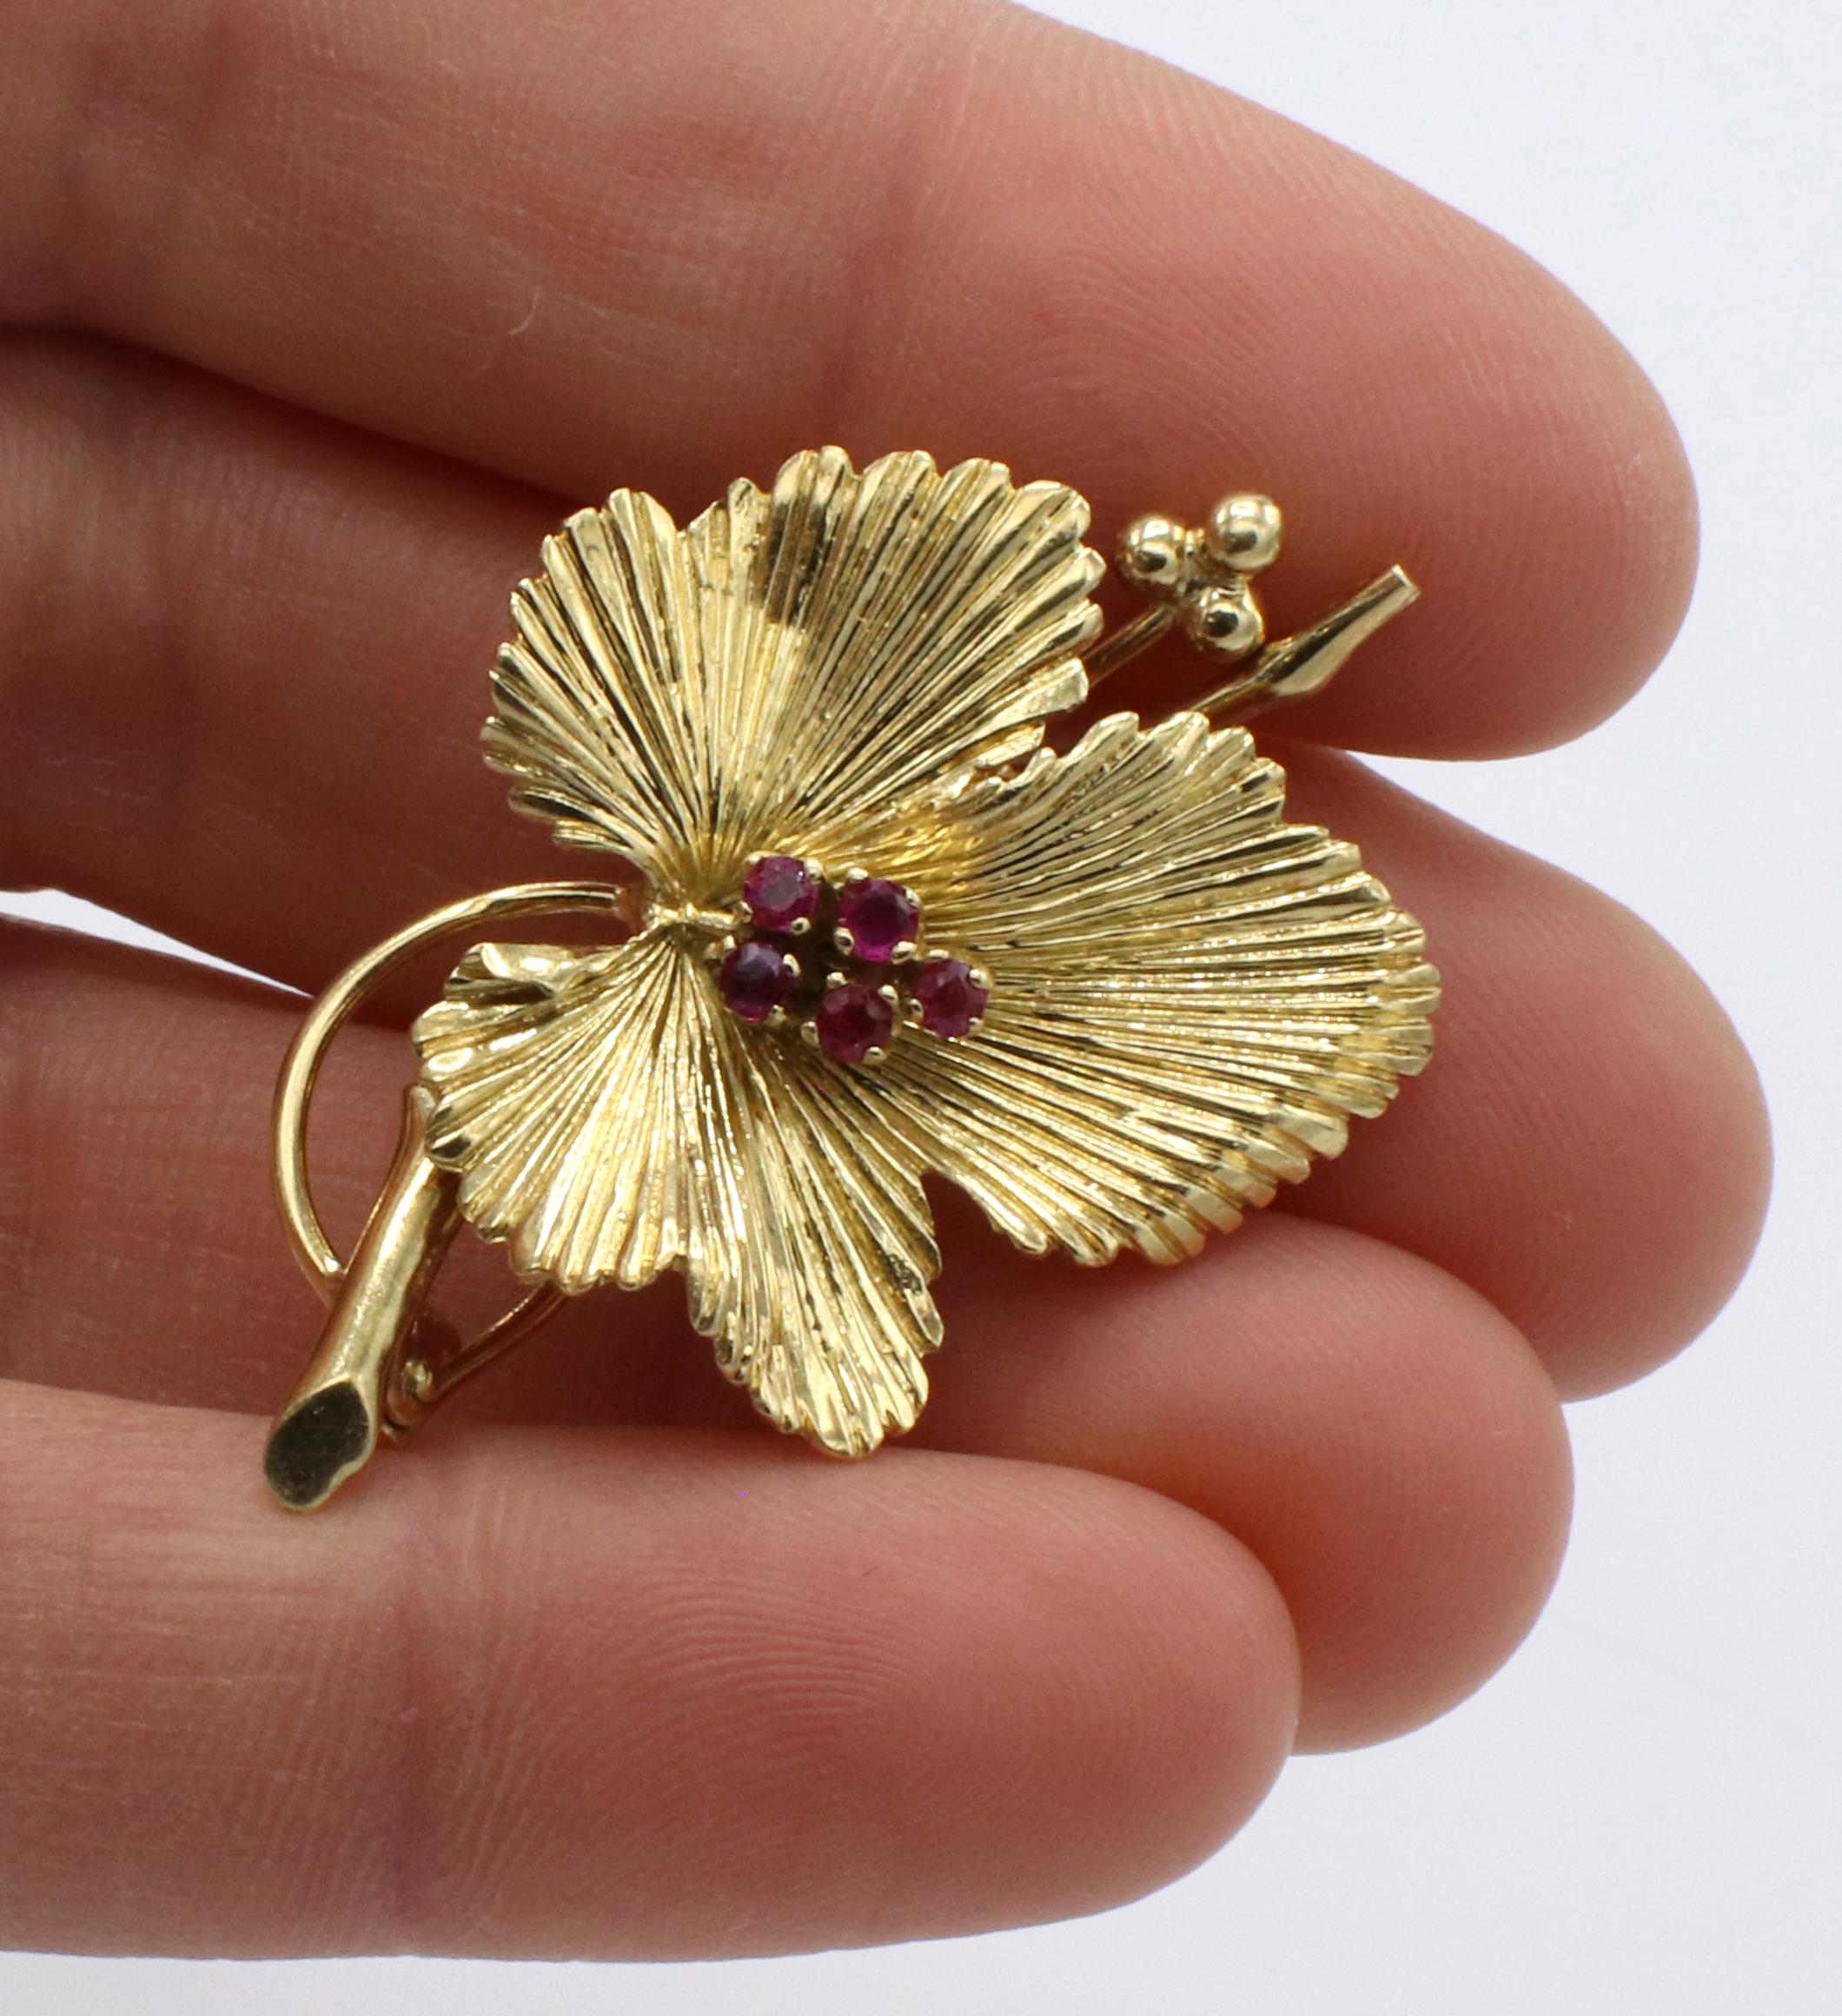 Tiffany & Co. 18 Karat Yellow Gold Ruby Leaf Pin Brooch
Metal: 18k yellow gold
Weight: 7.44 grams
Length: 29.5mm
Width: 30mm
Signed: Tiffany & Co. 18K Italy
